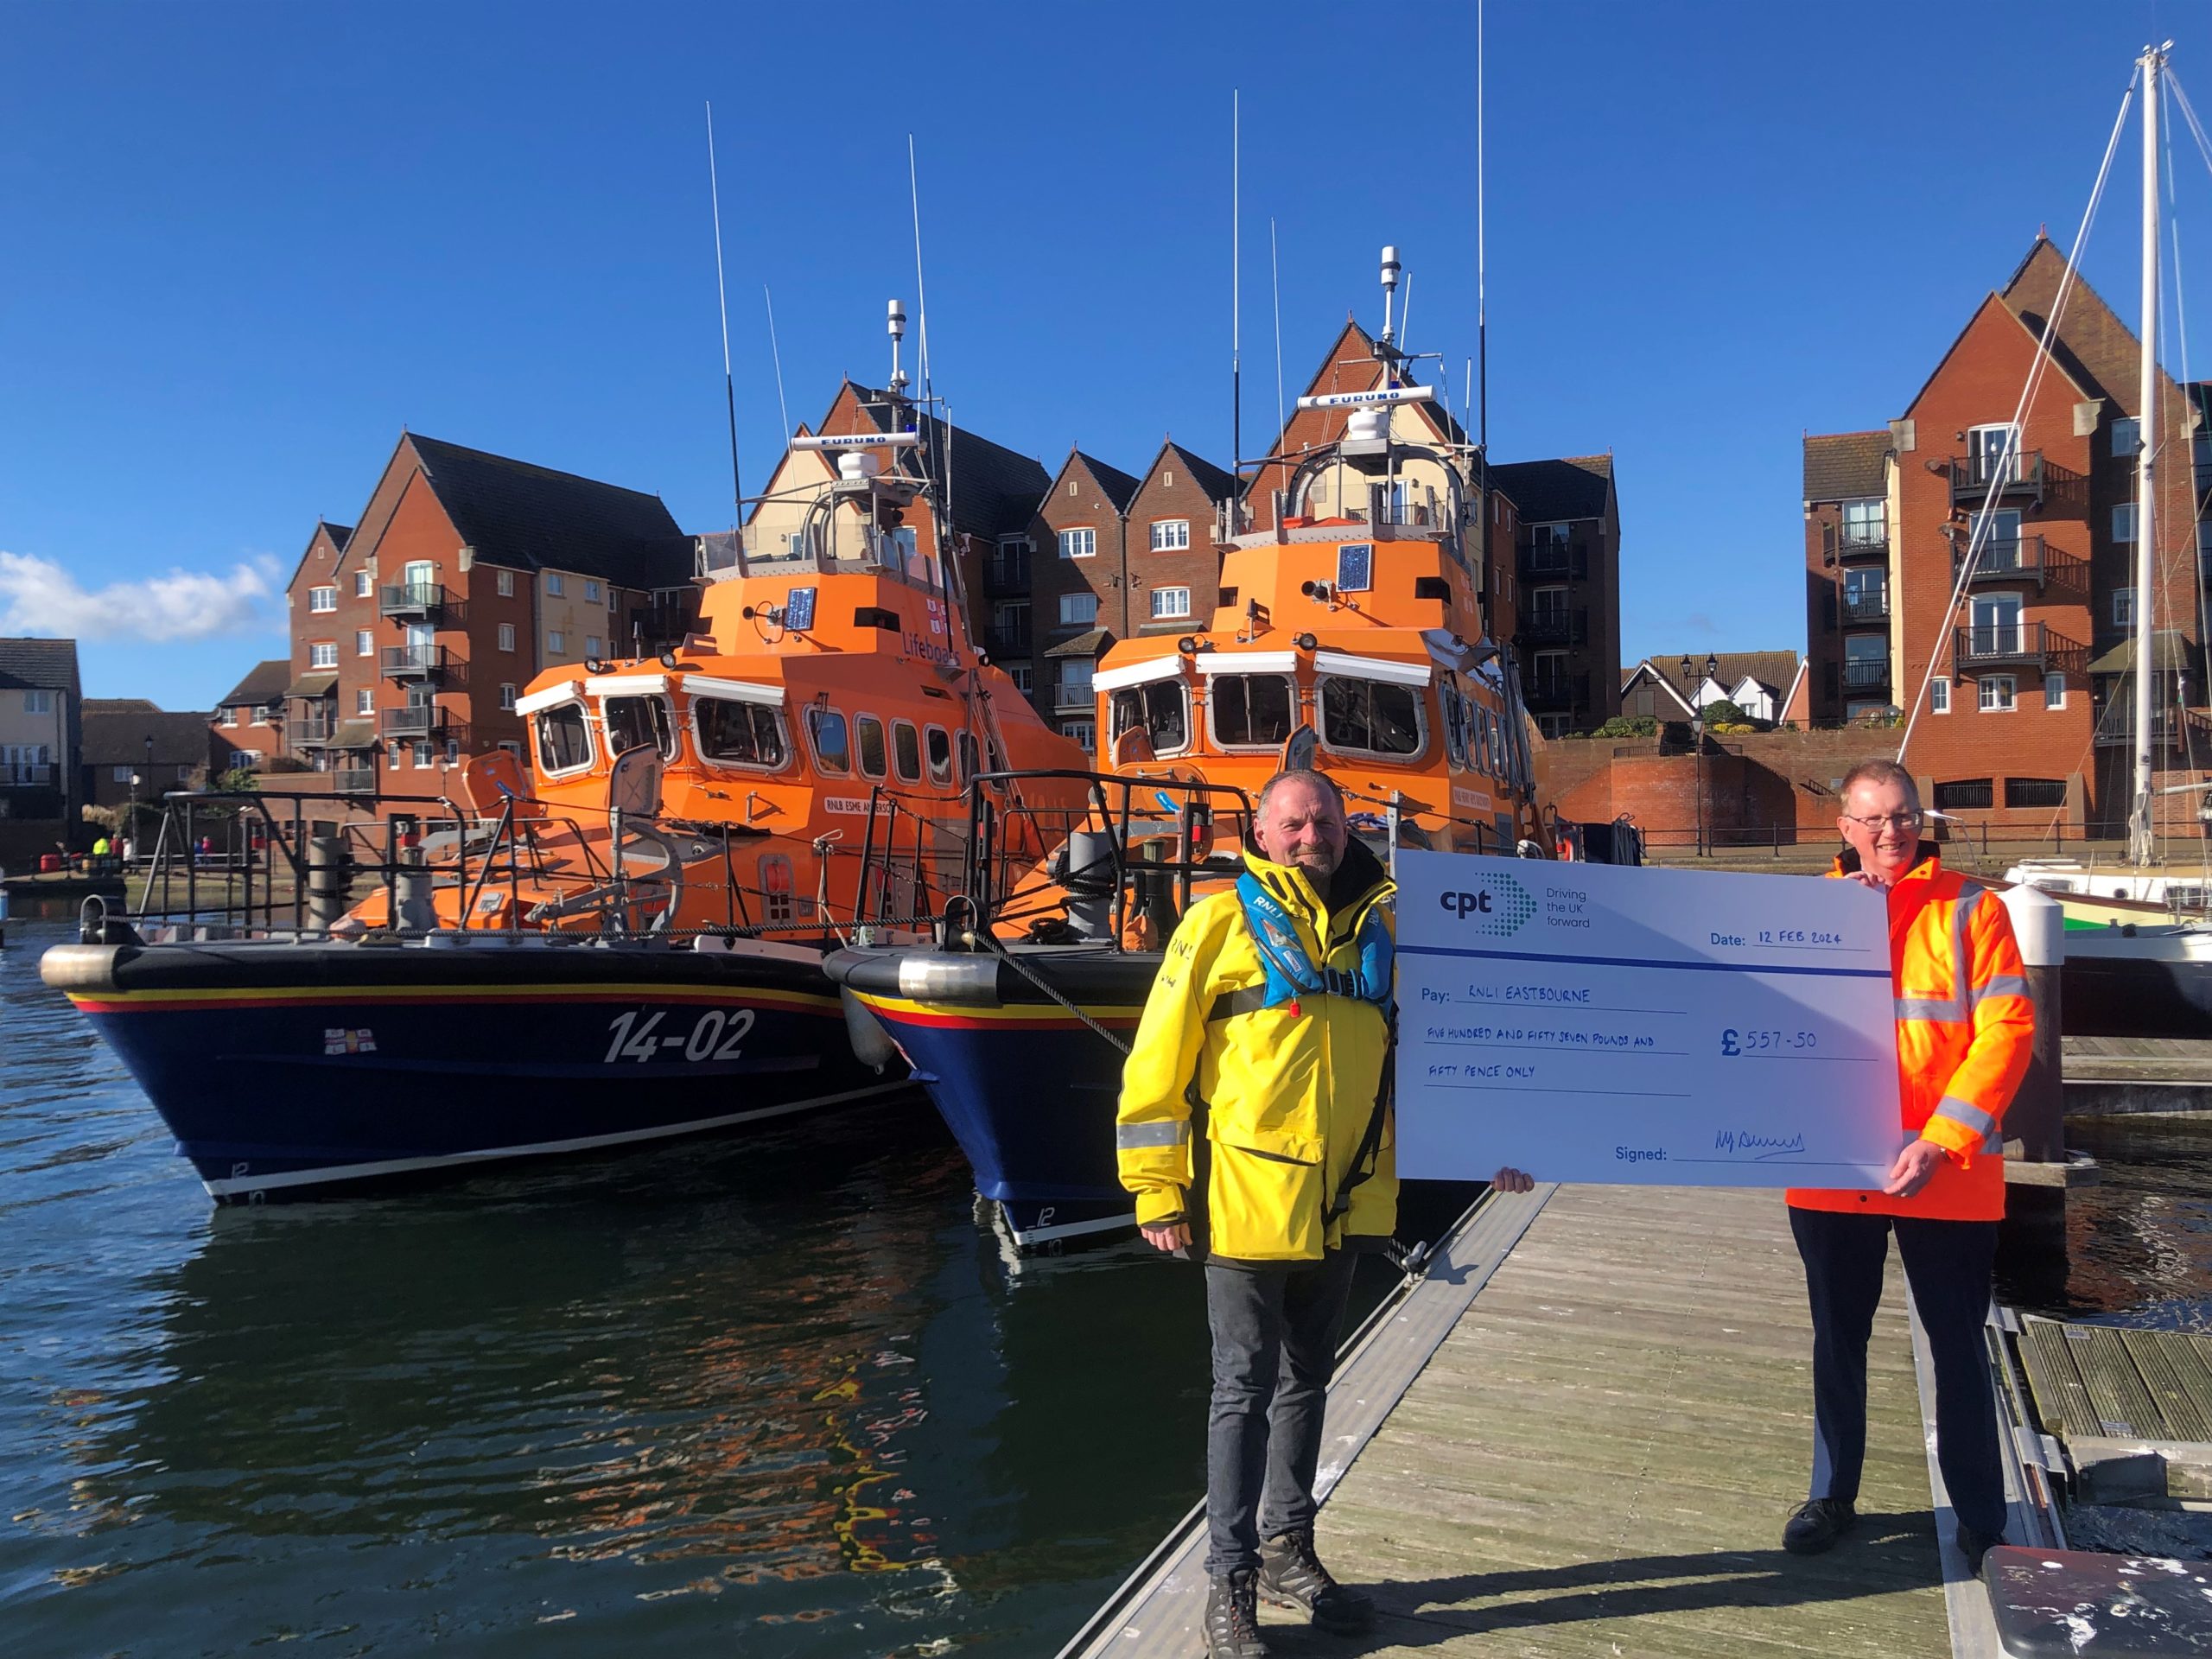 CPT raises funds for RNLI